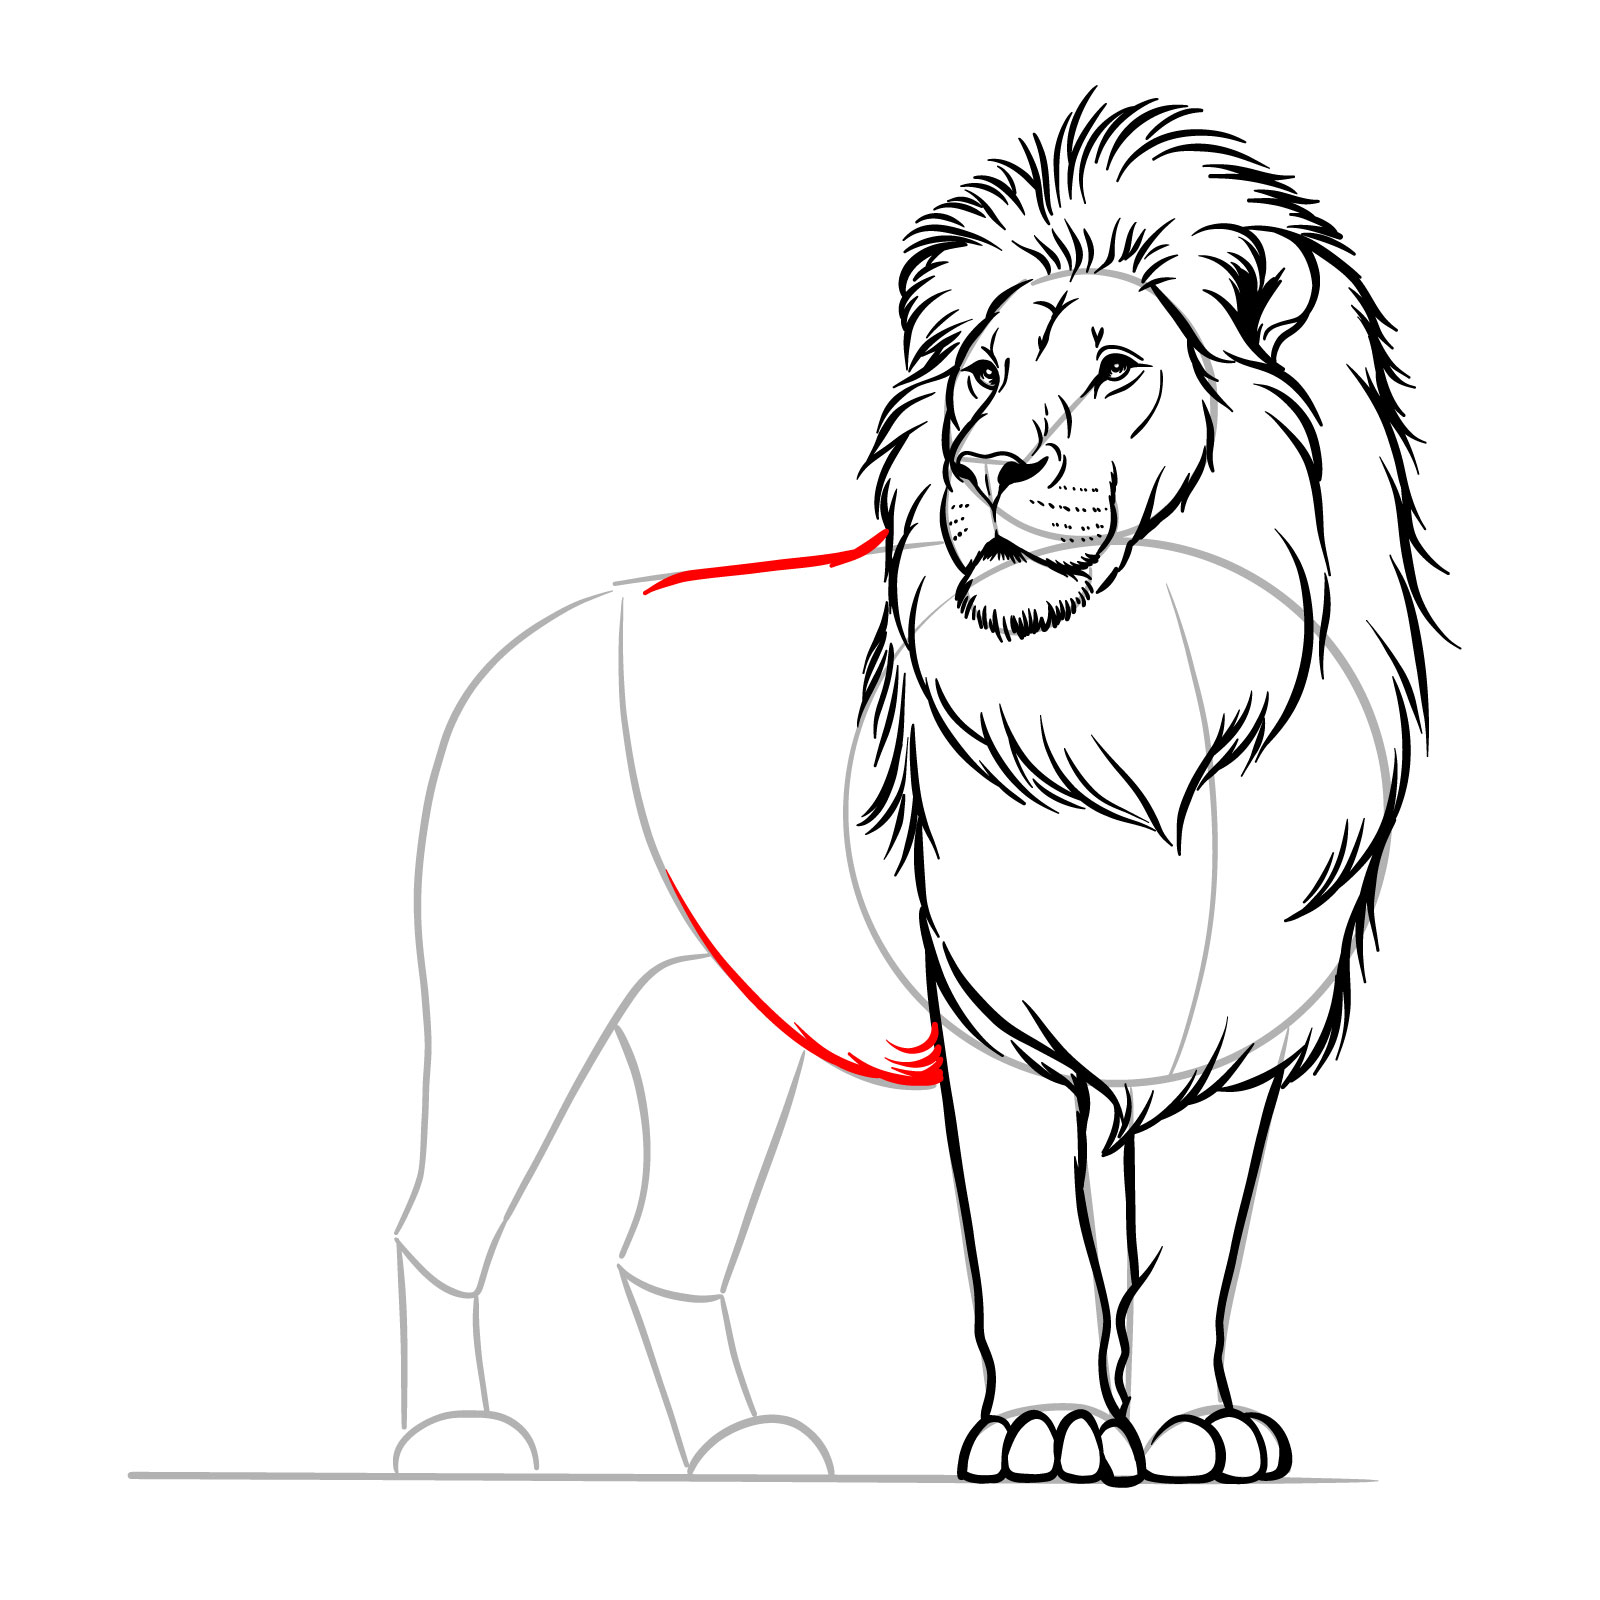 Creating the body contour in a standing lion drawing guide - step 11